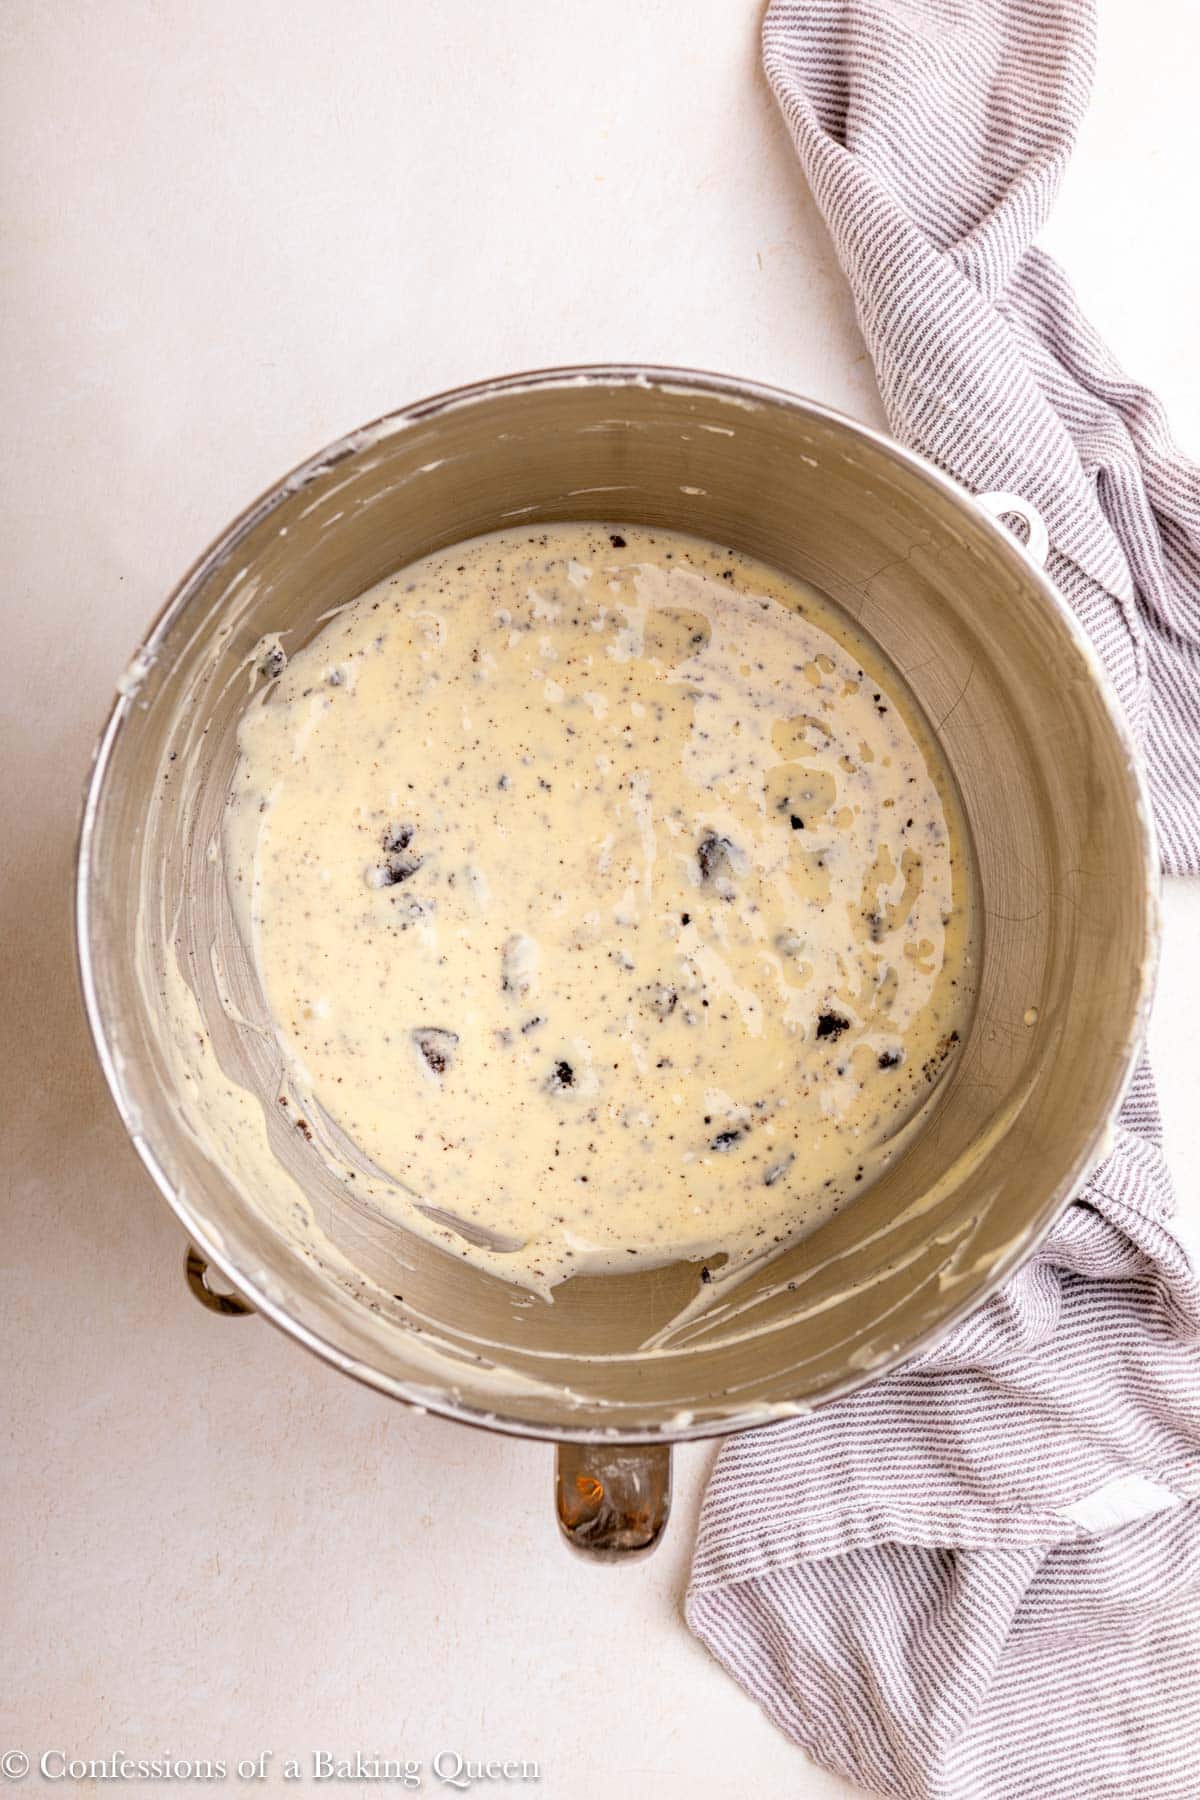 oreo cheesecake batter in a metal bowl on a light surface with a blue linen